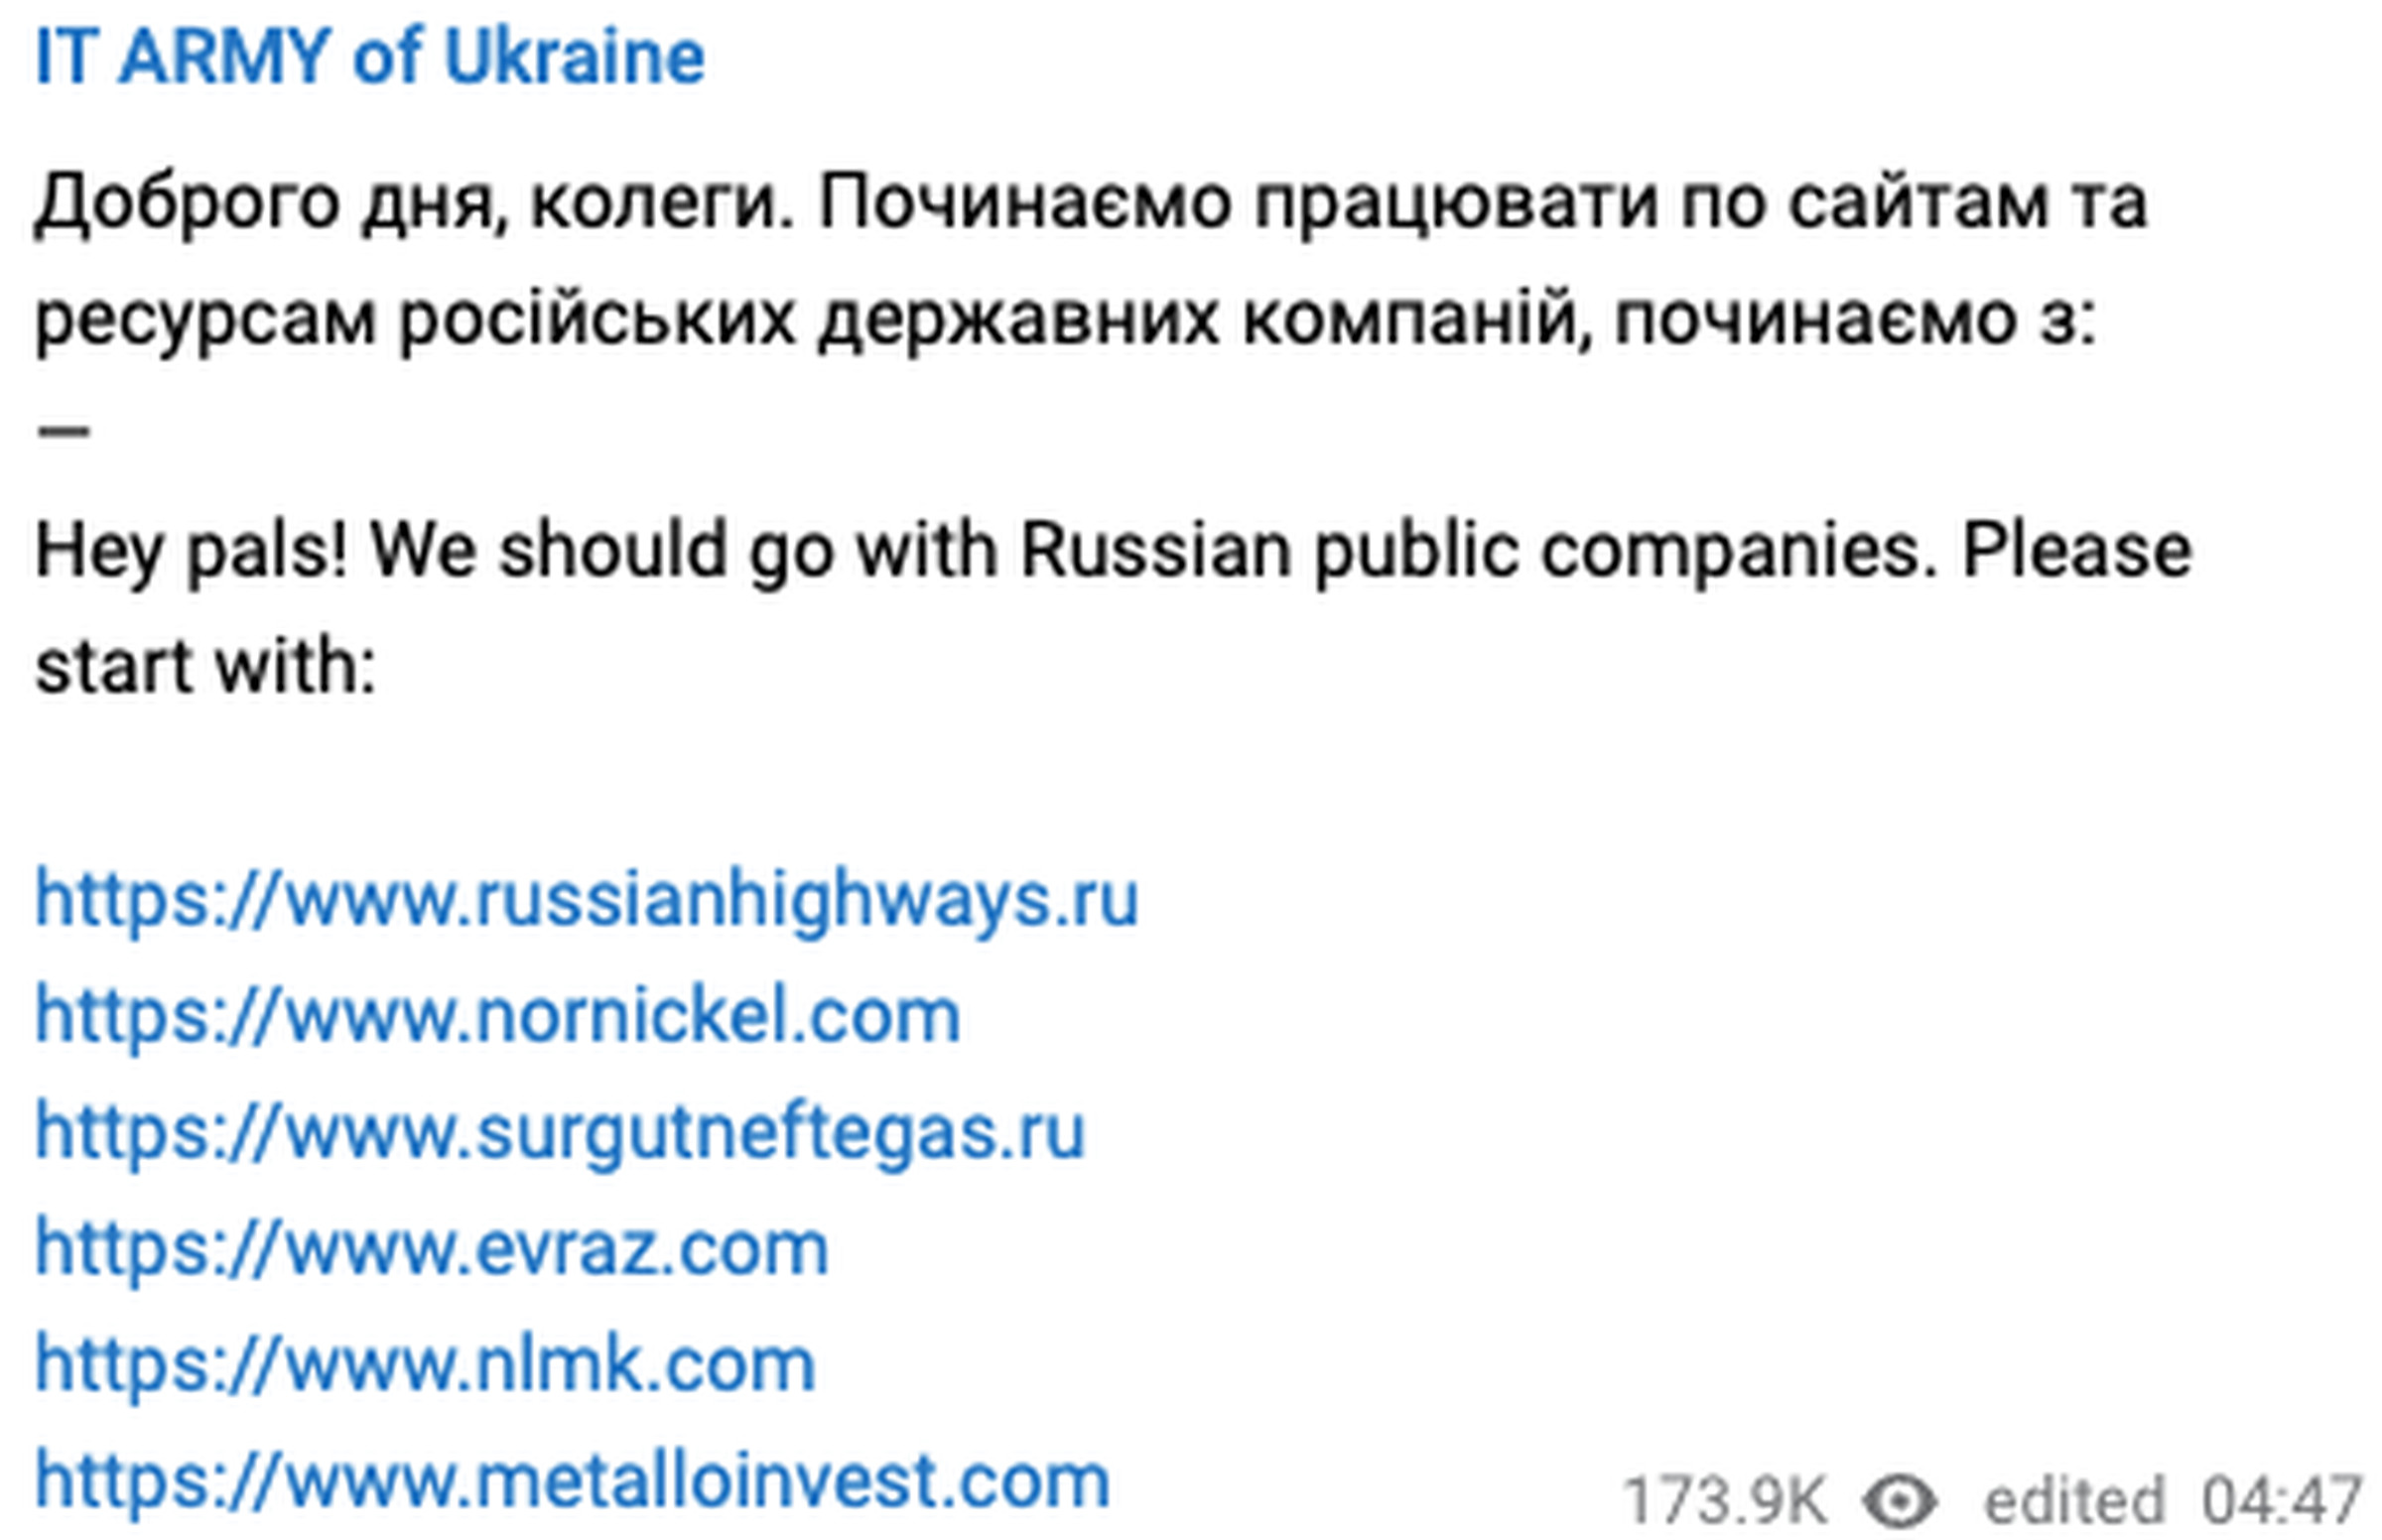 Message reads: Hey pals! We should go with Russian public companies. Please start with: https://www.russianhighways.ruhttps://www.nornickel.comhttps://www.surgutneftegas.ruhttps://www.evraz.comhttps://www.nlmk.comhttps://www.metalloinvest.com